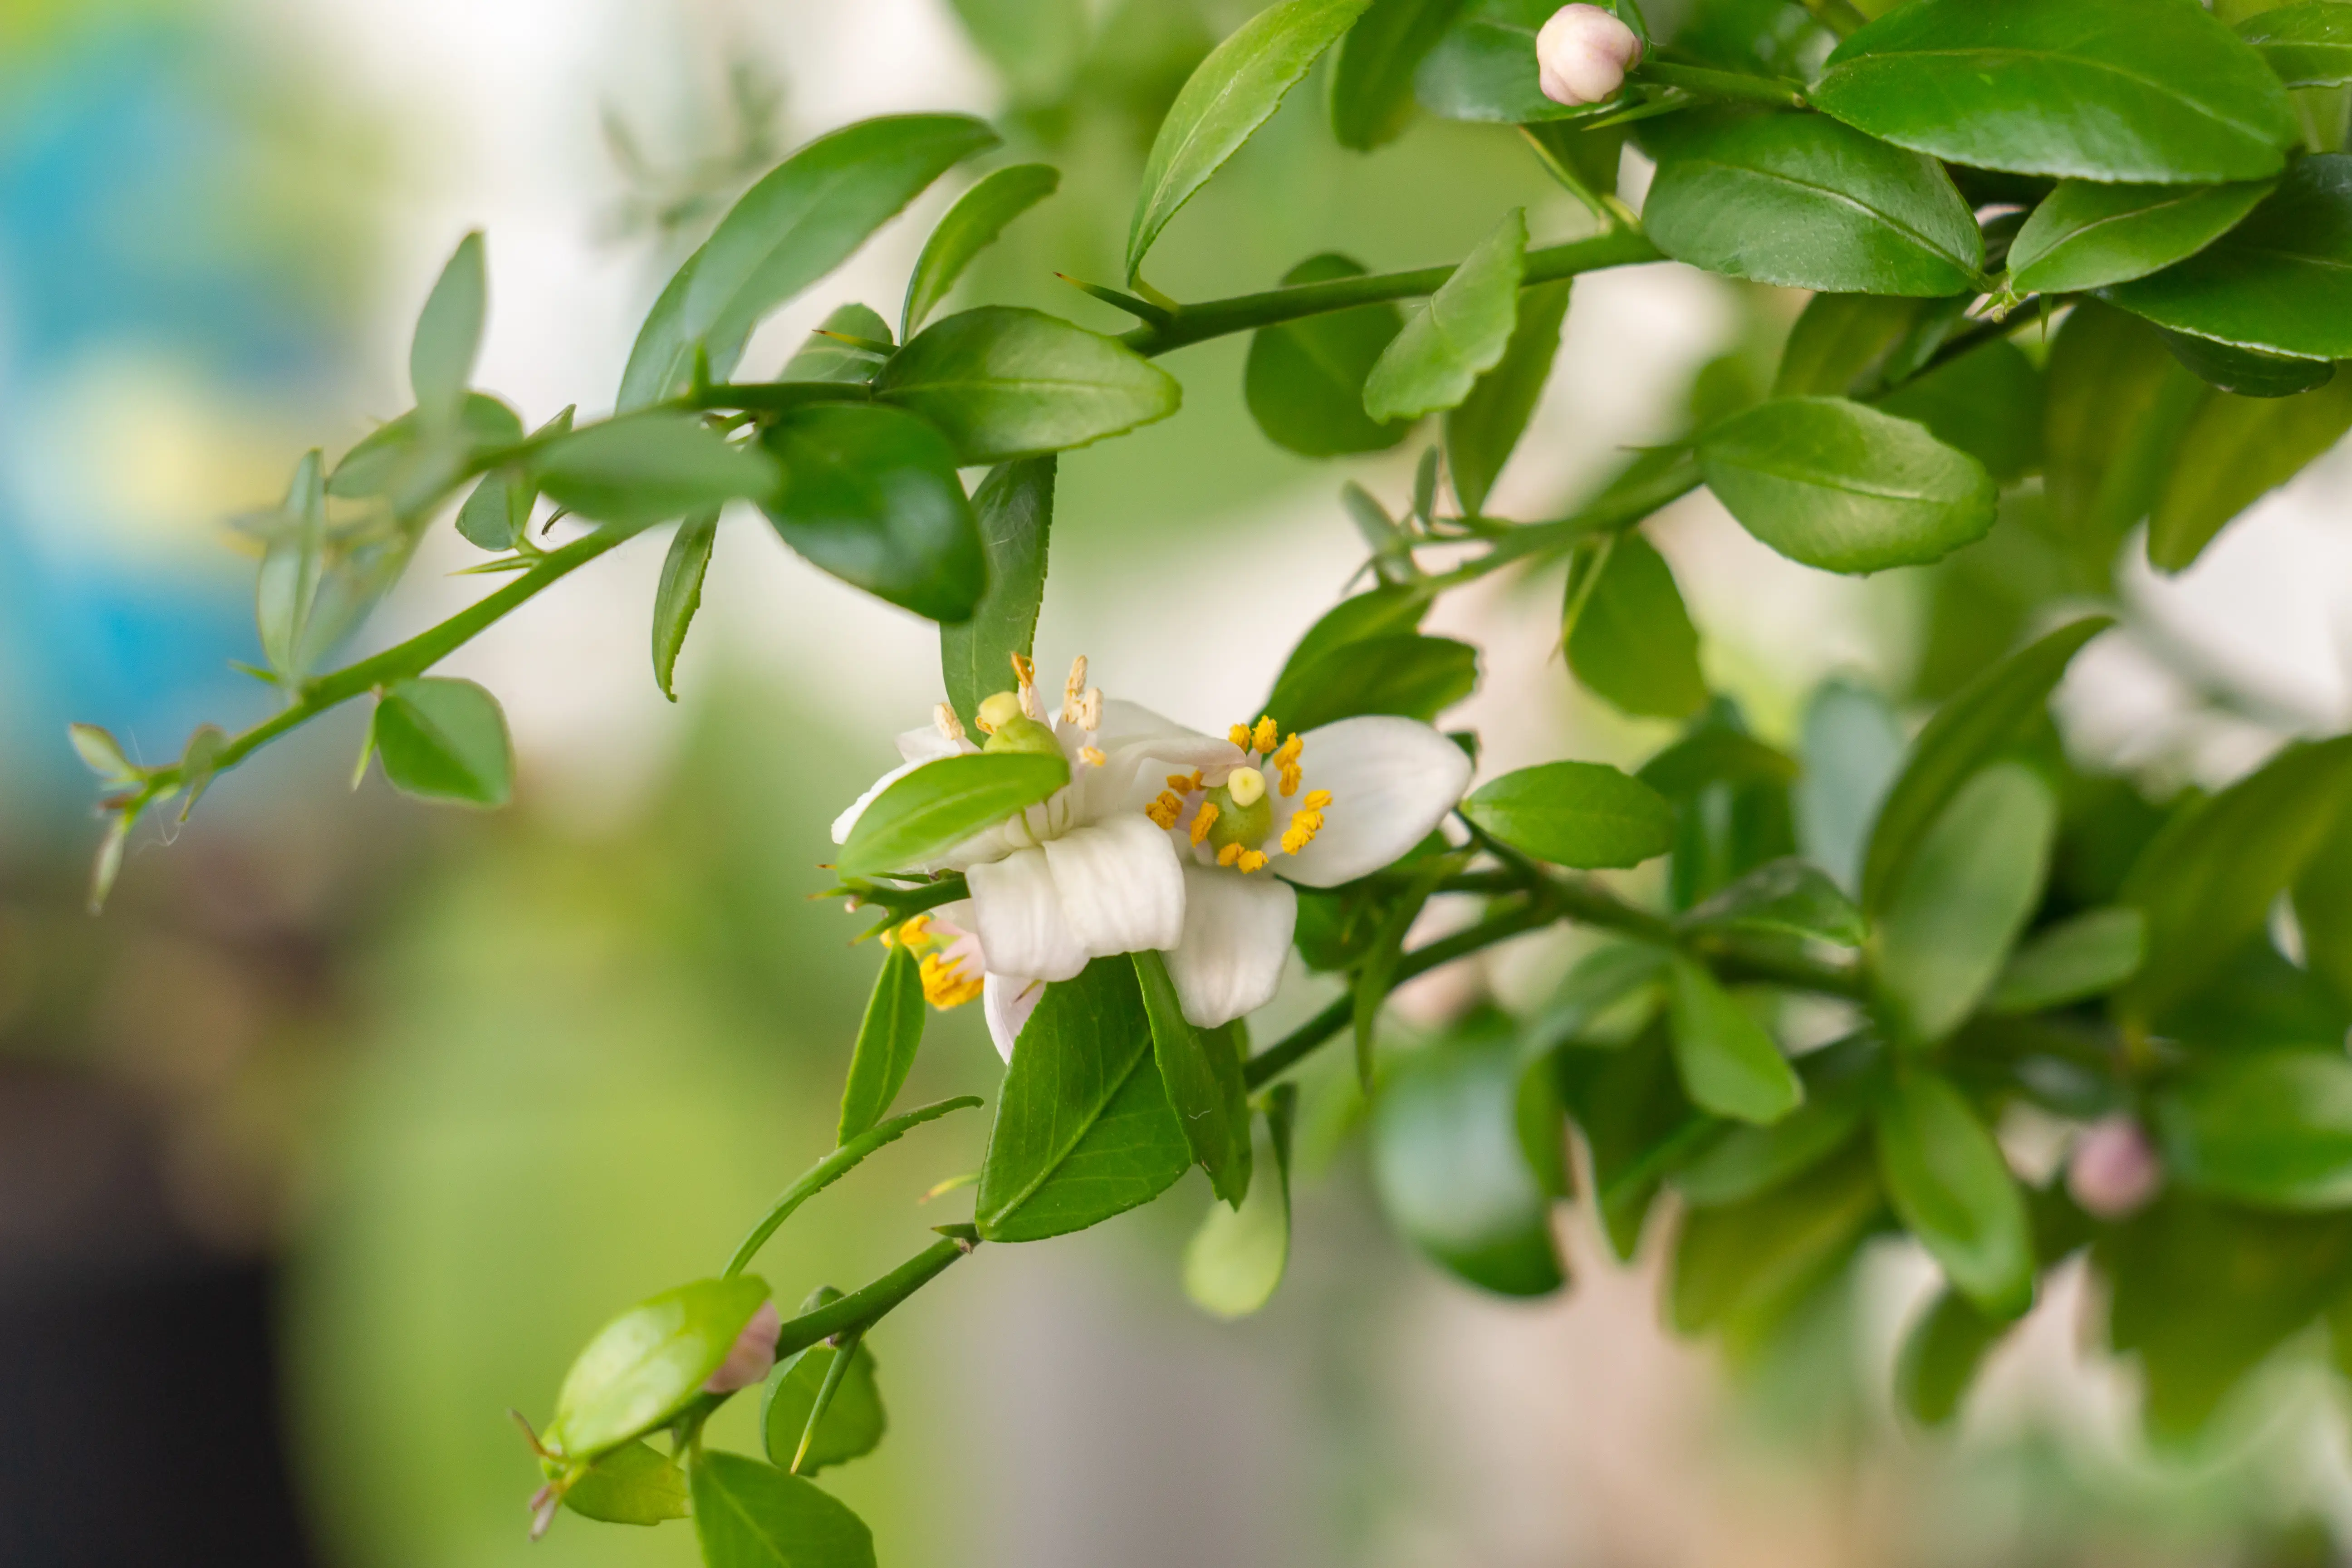 An image displaying the Finger Lime plant and flowers - the flowers are small and white with pale yellow centres. 